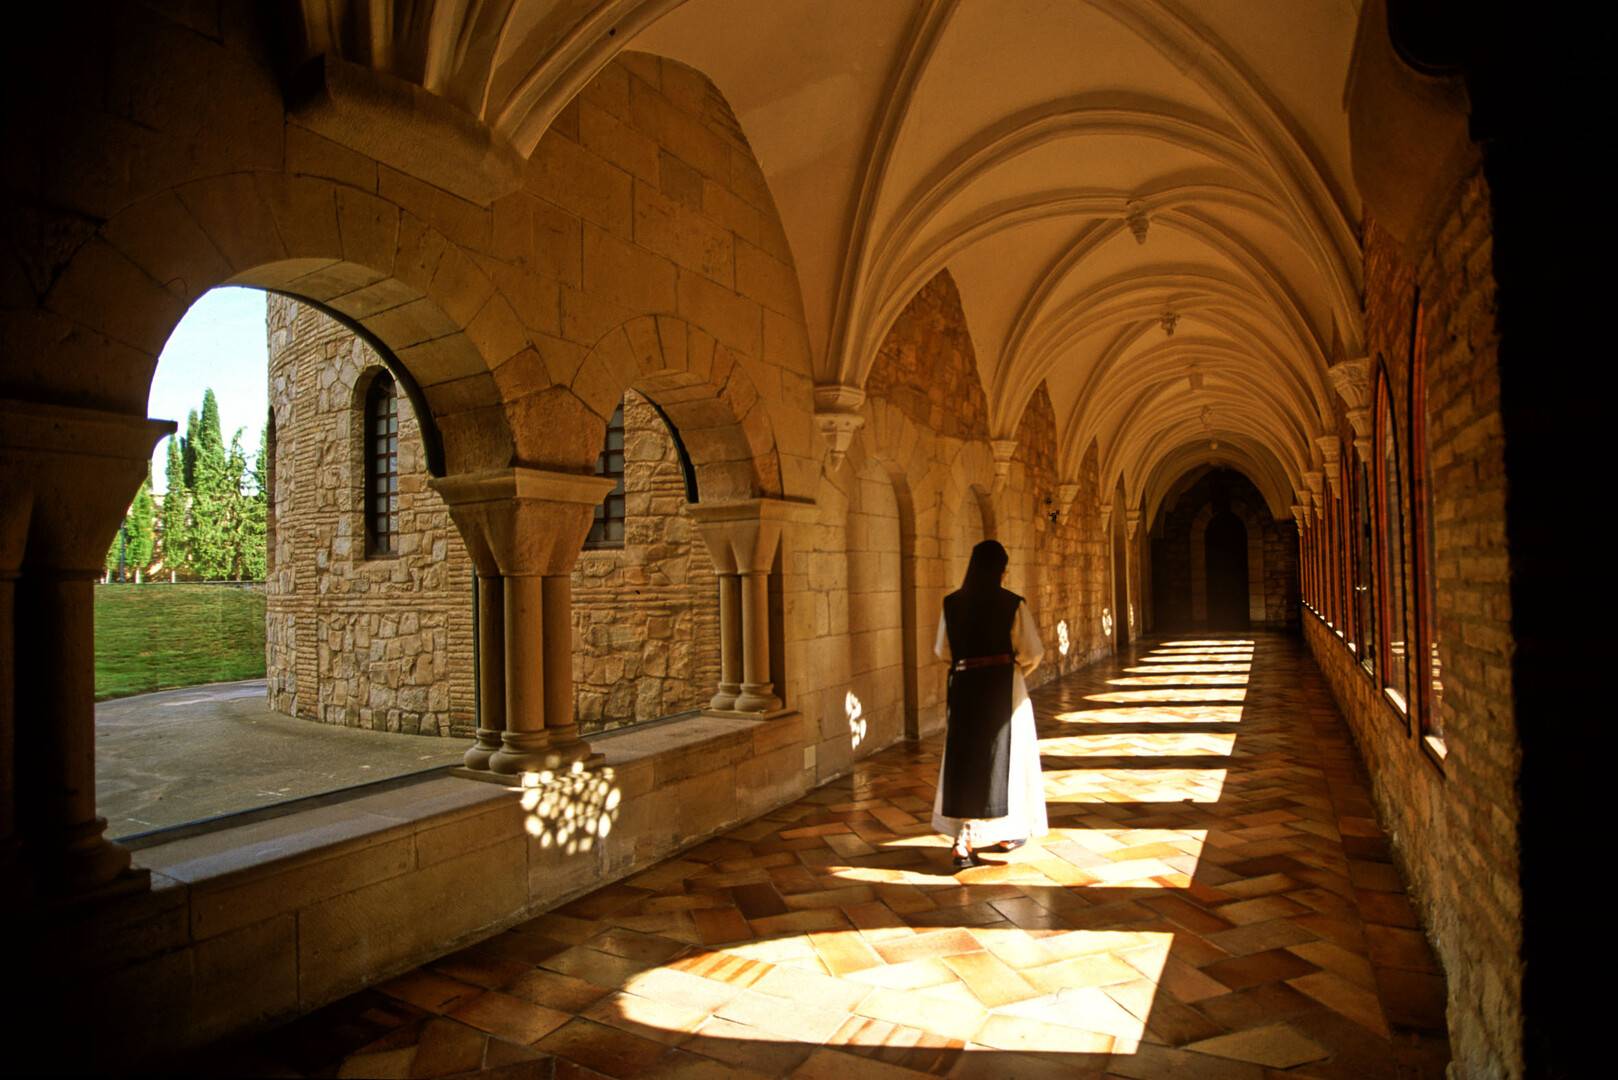 Nun in the Cloister of the Monastery of Tulebras